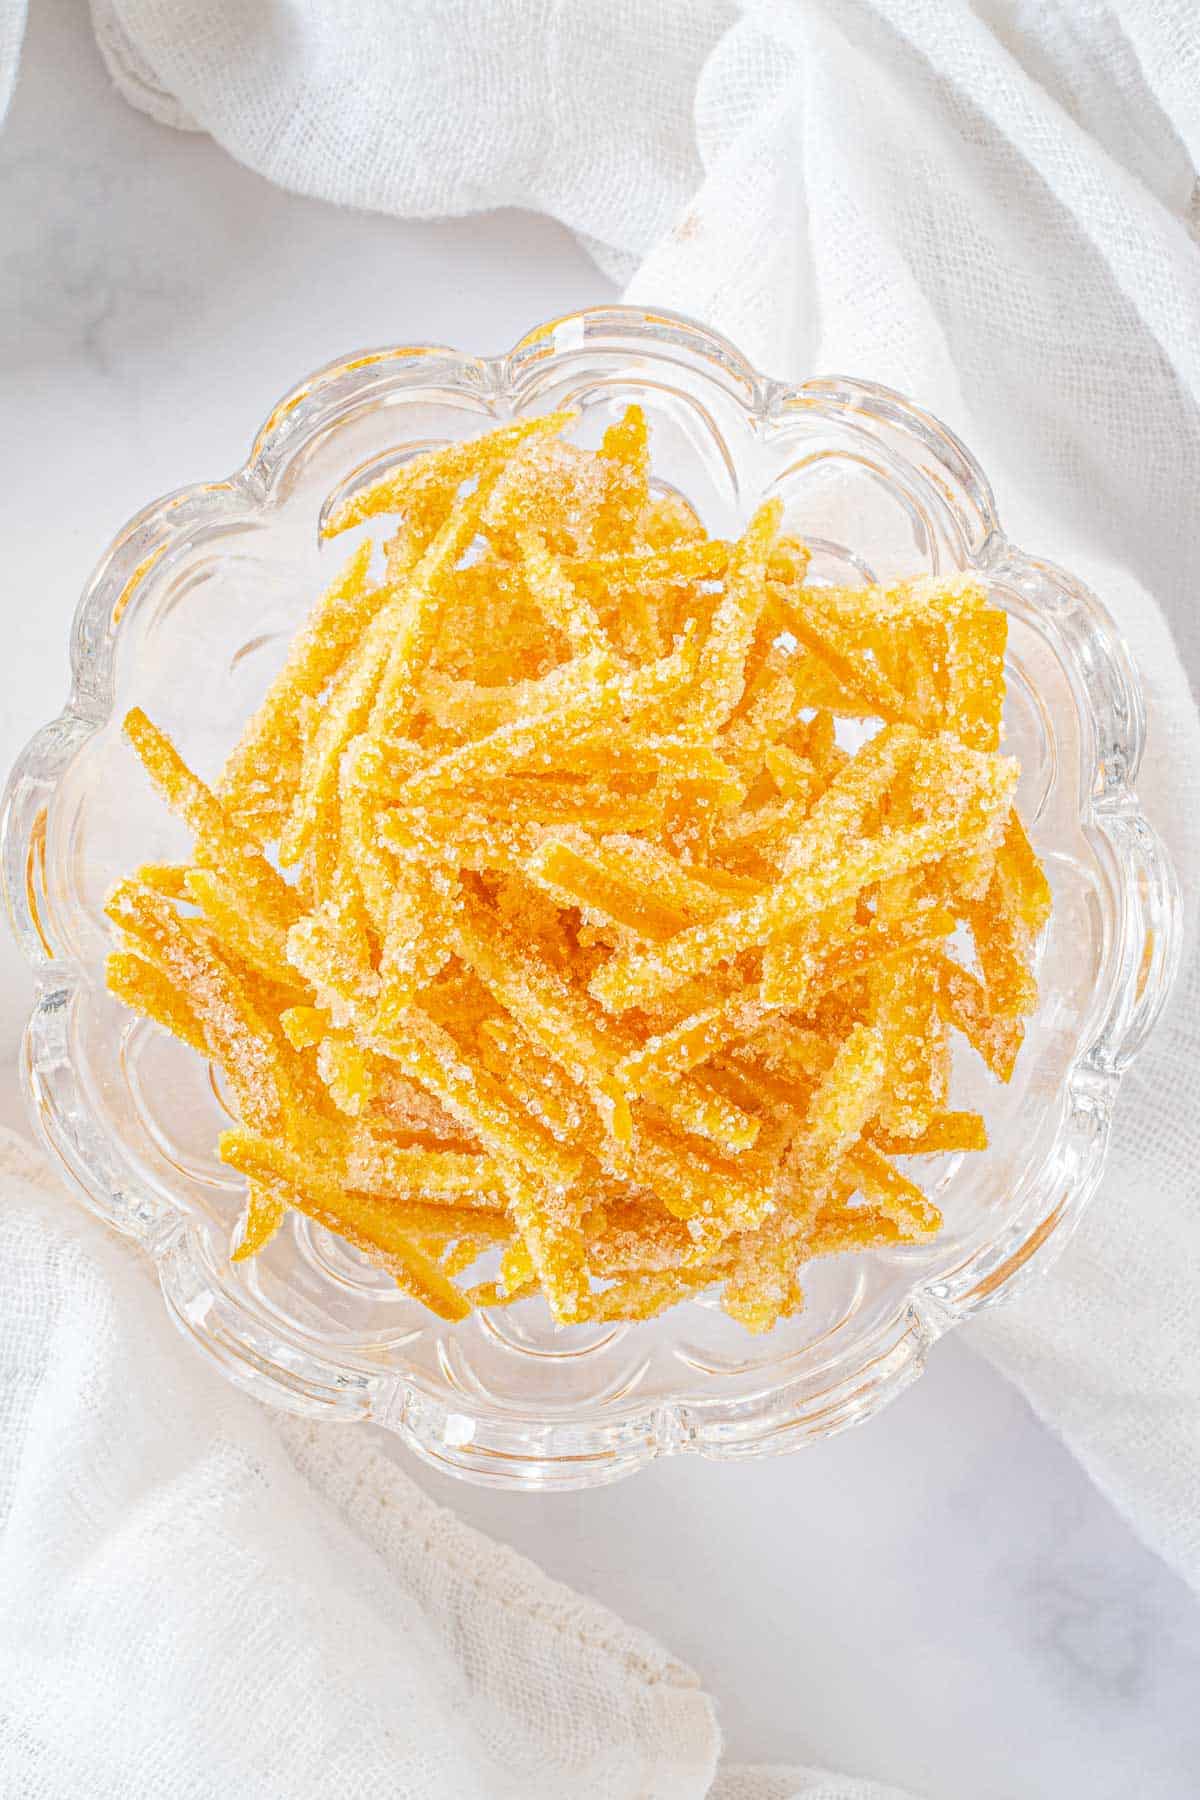 A candy dish filled with orange peel candy.